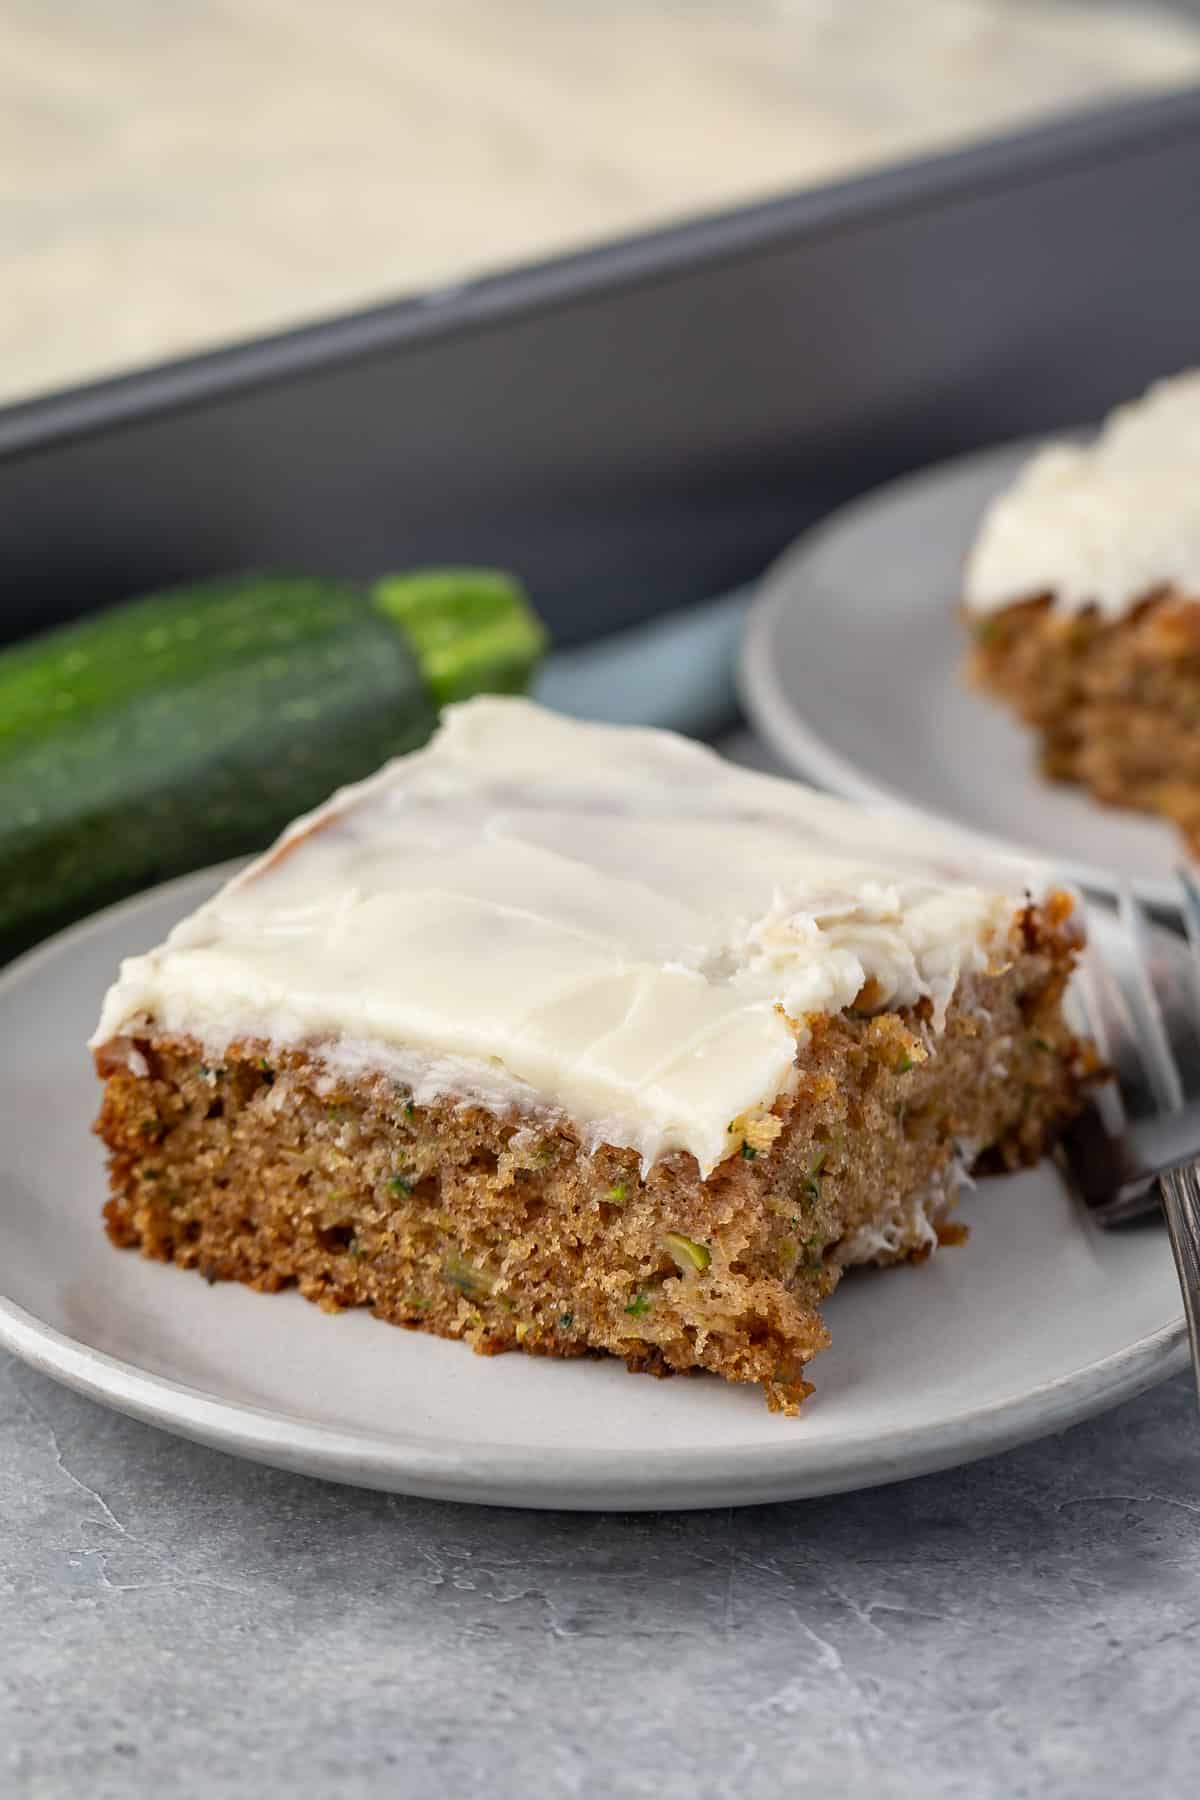 square slice of zucchini cake on a grey plate next to a fork.